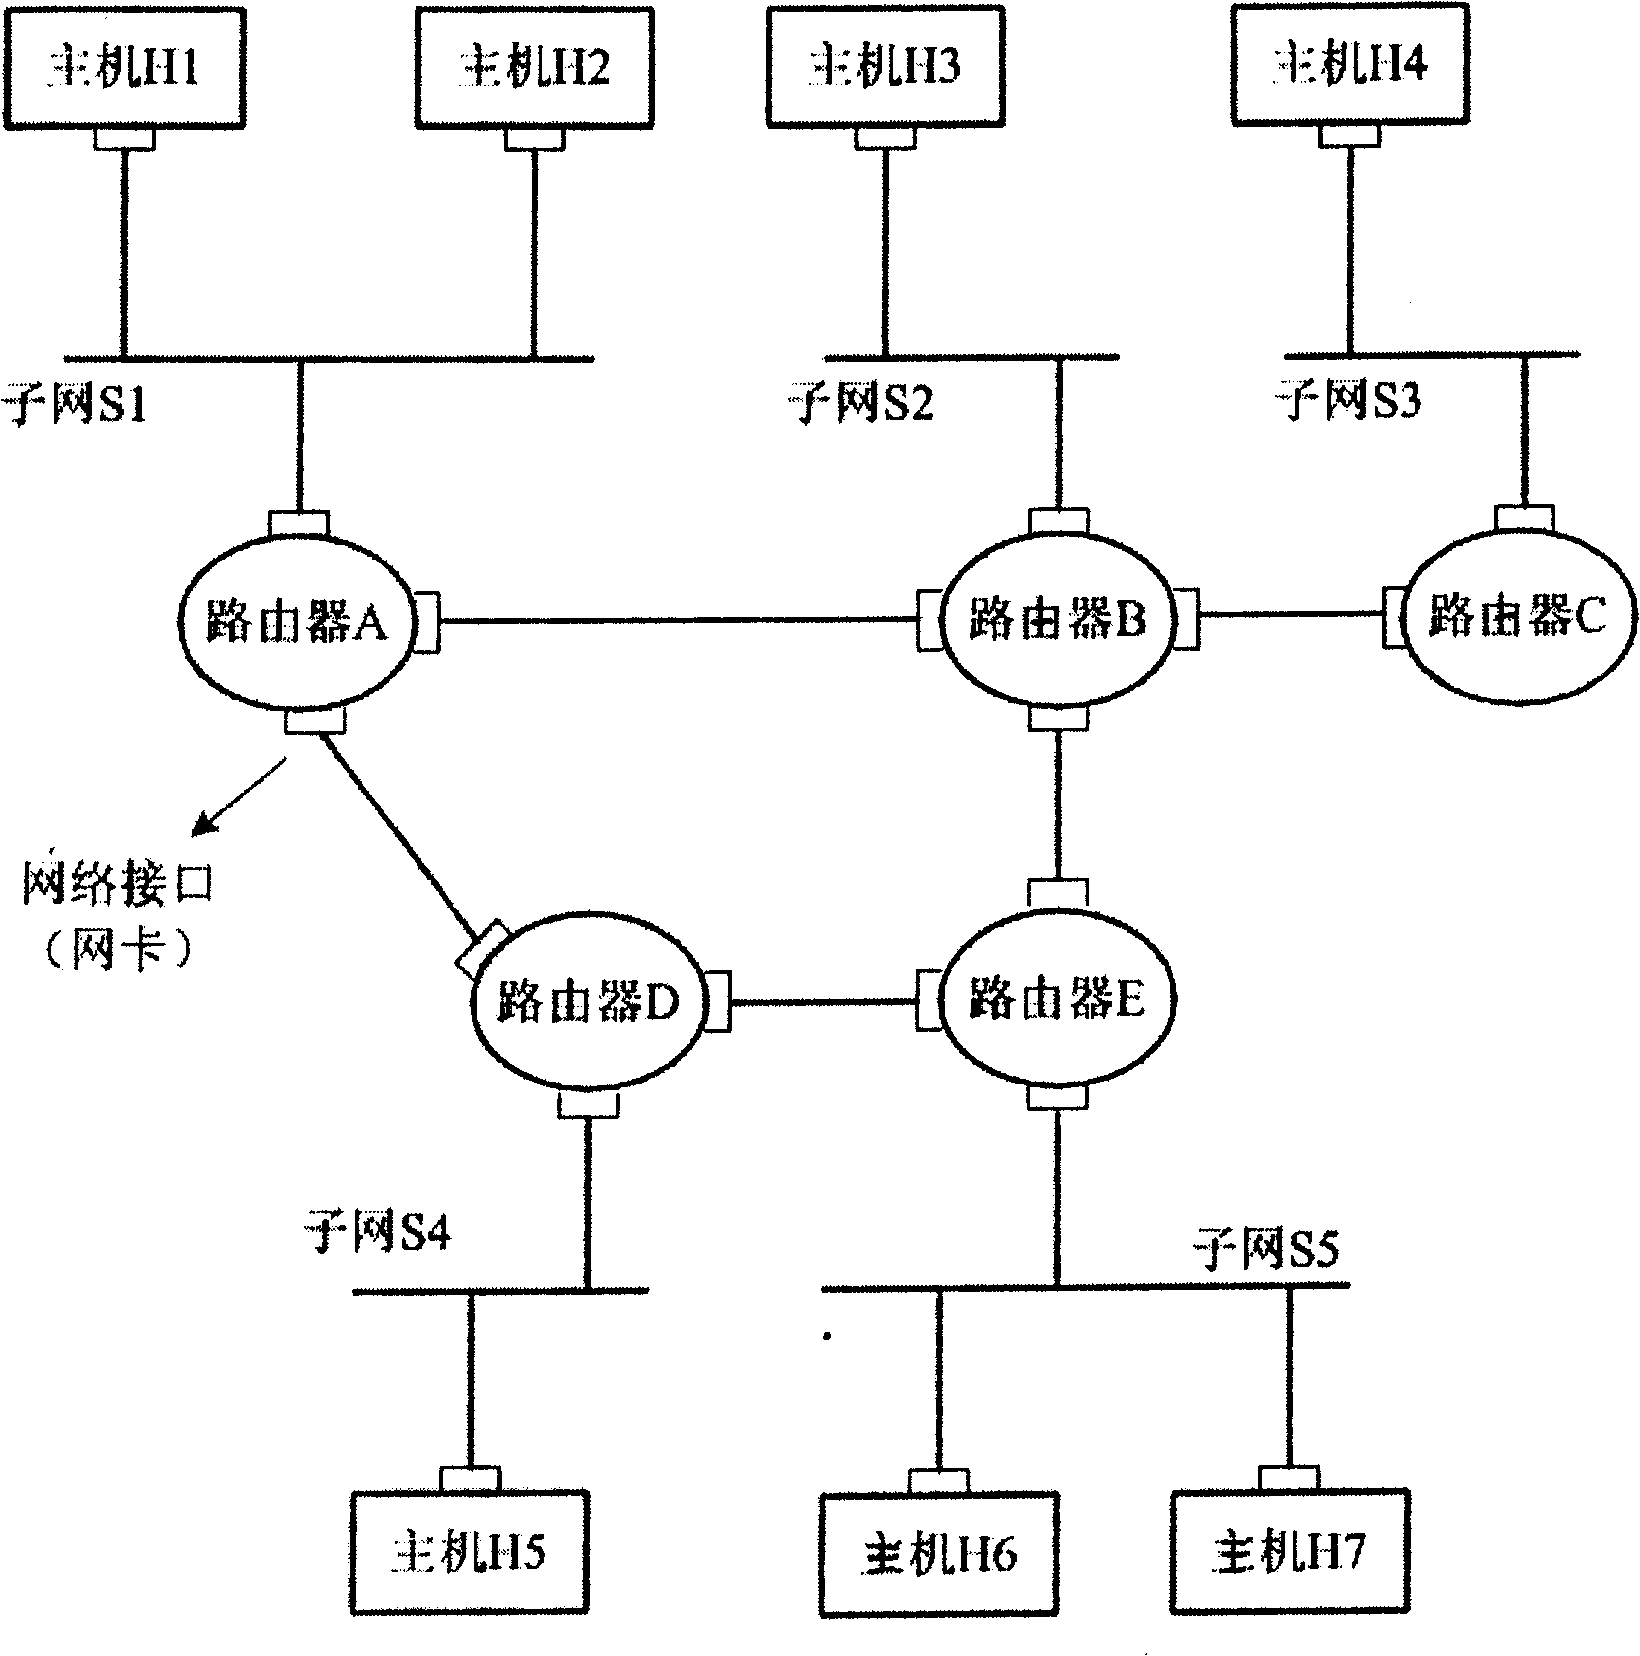 Method for identifying multicast by using unicast address in IP network